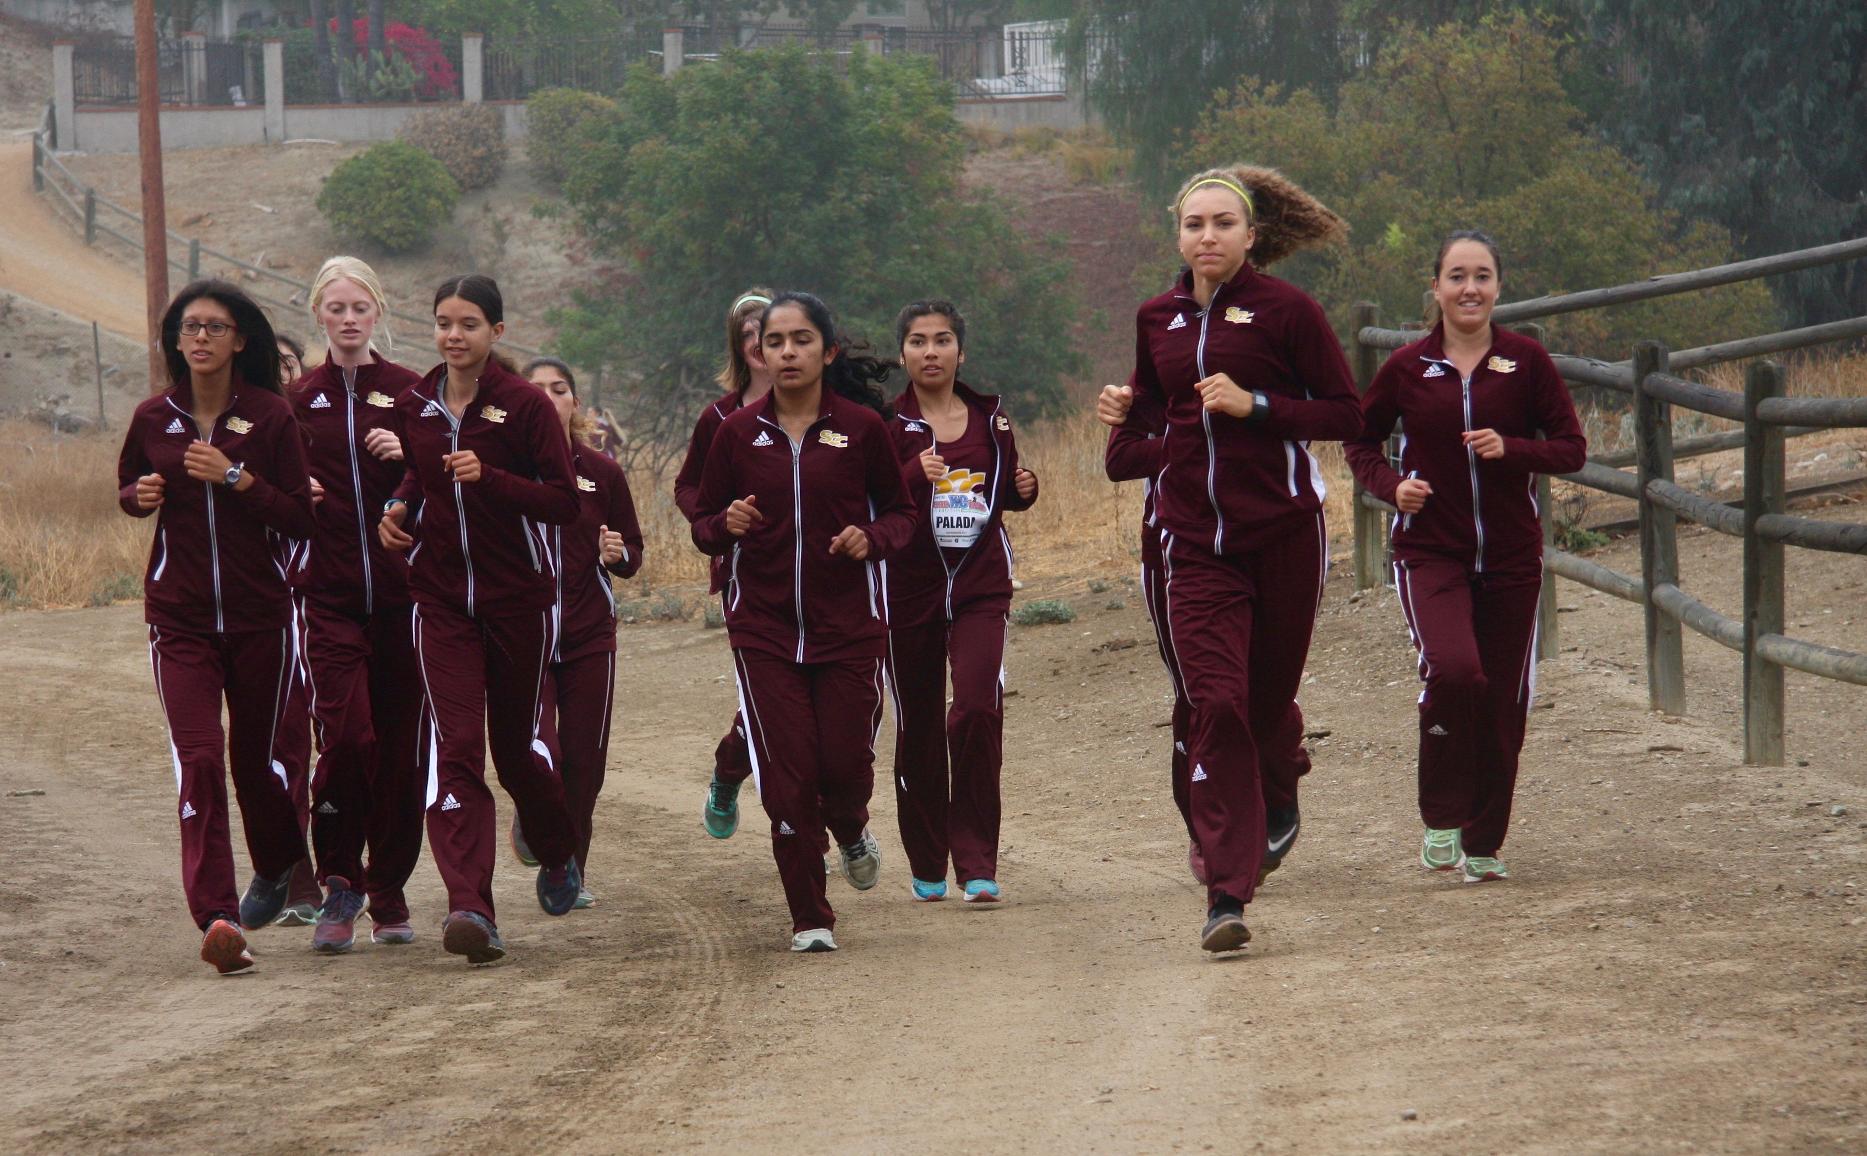 Women's Cross Country finishes in 6th place at the Mt. SAC Invite